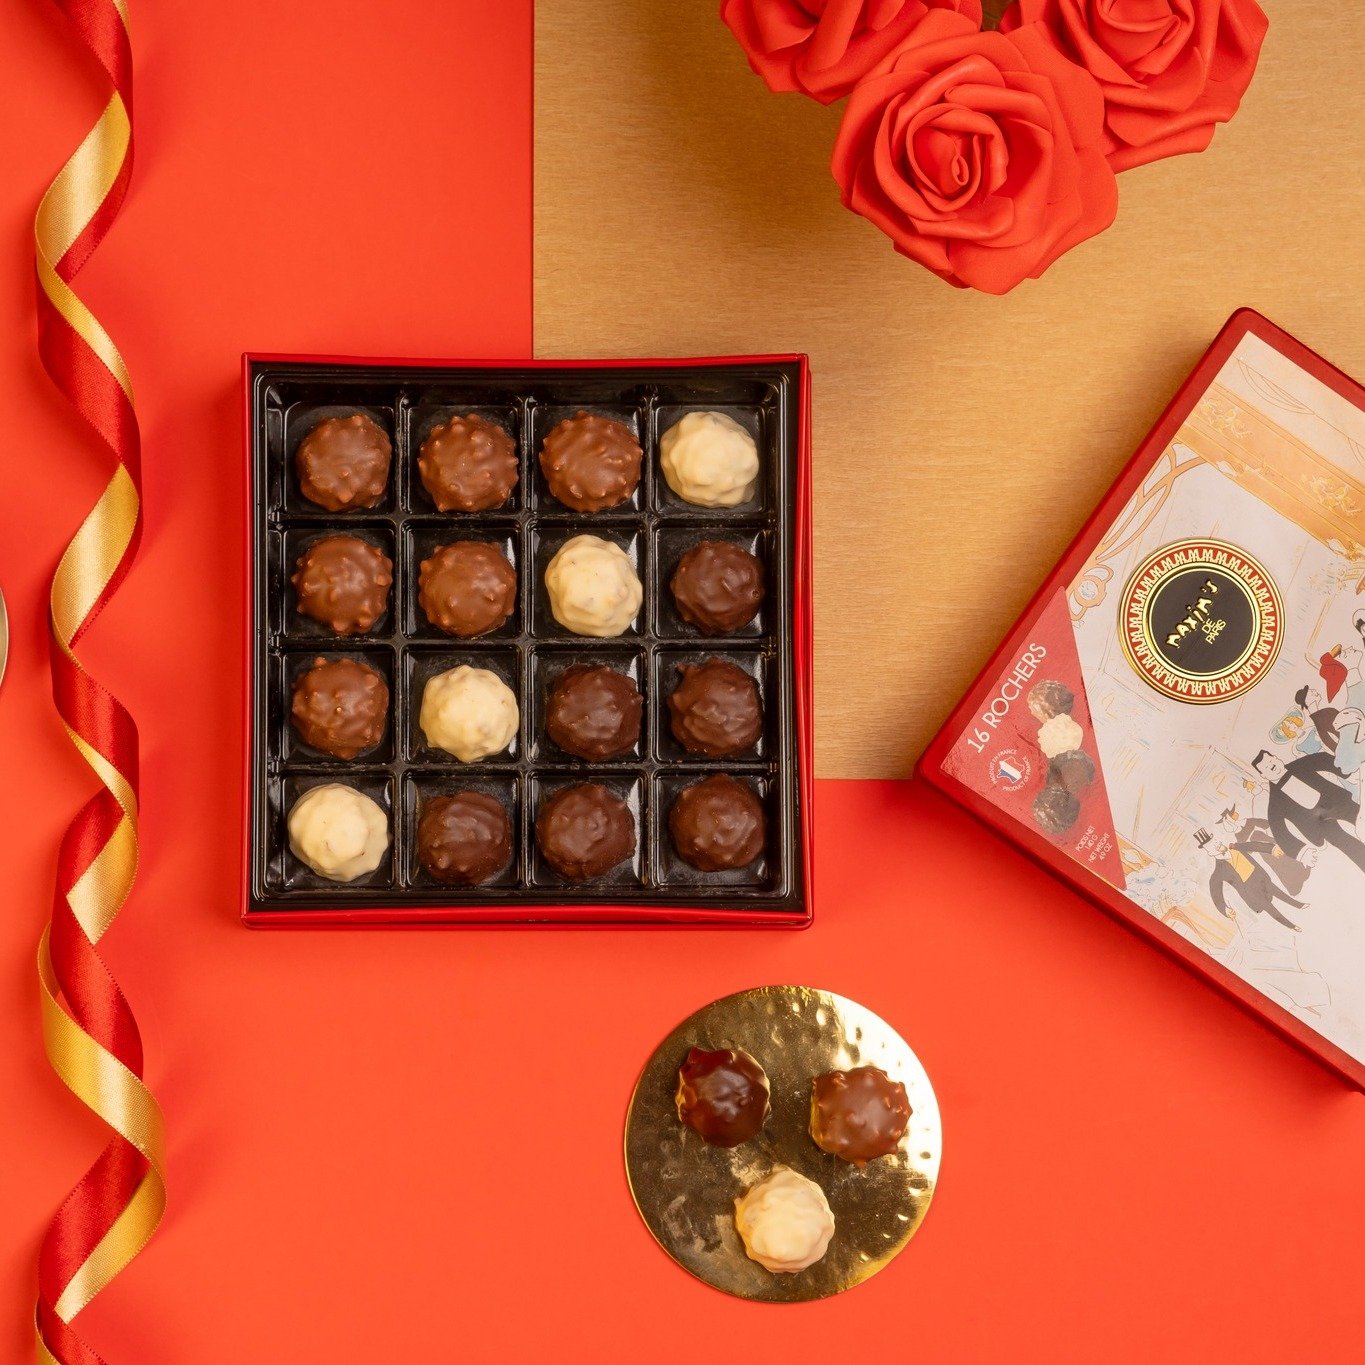 🌟Give your Mom the sweetest surprise this Mother's Day!

Surprise her this Mother's Day with our exclusive Maxim's Tin of Assorted Chocolate Rochers. 🍫 Handcrafted from the finest French ingredients, each piece promises pure indulgence. This assort